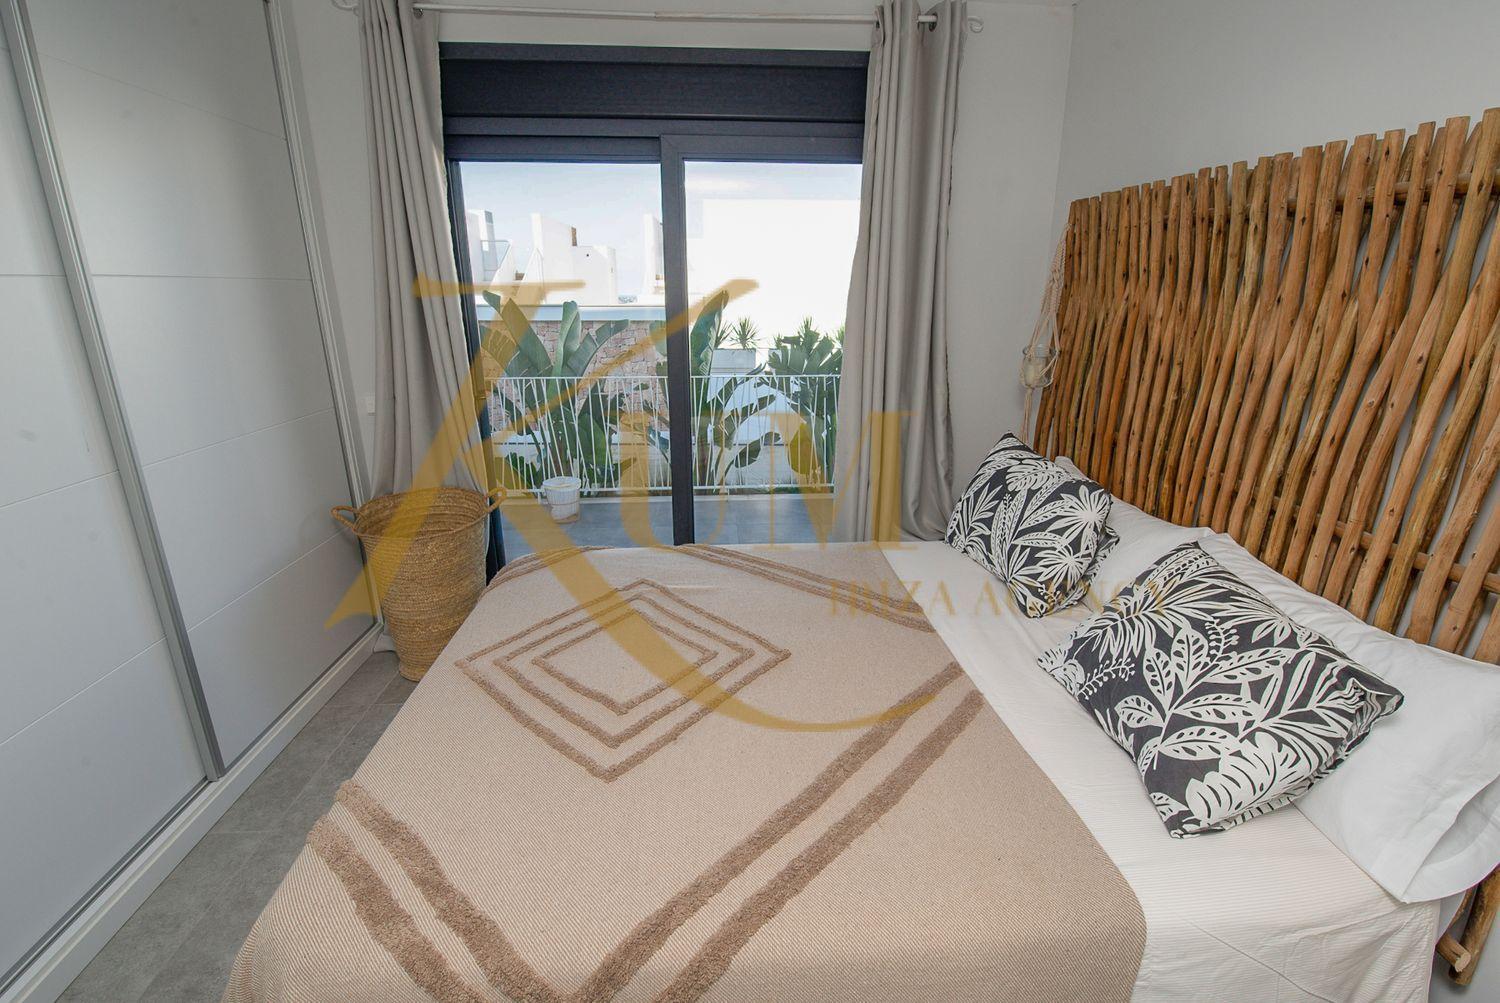 Apartment for rent in August and September. Solarium and sea views.